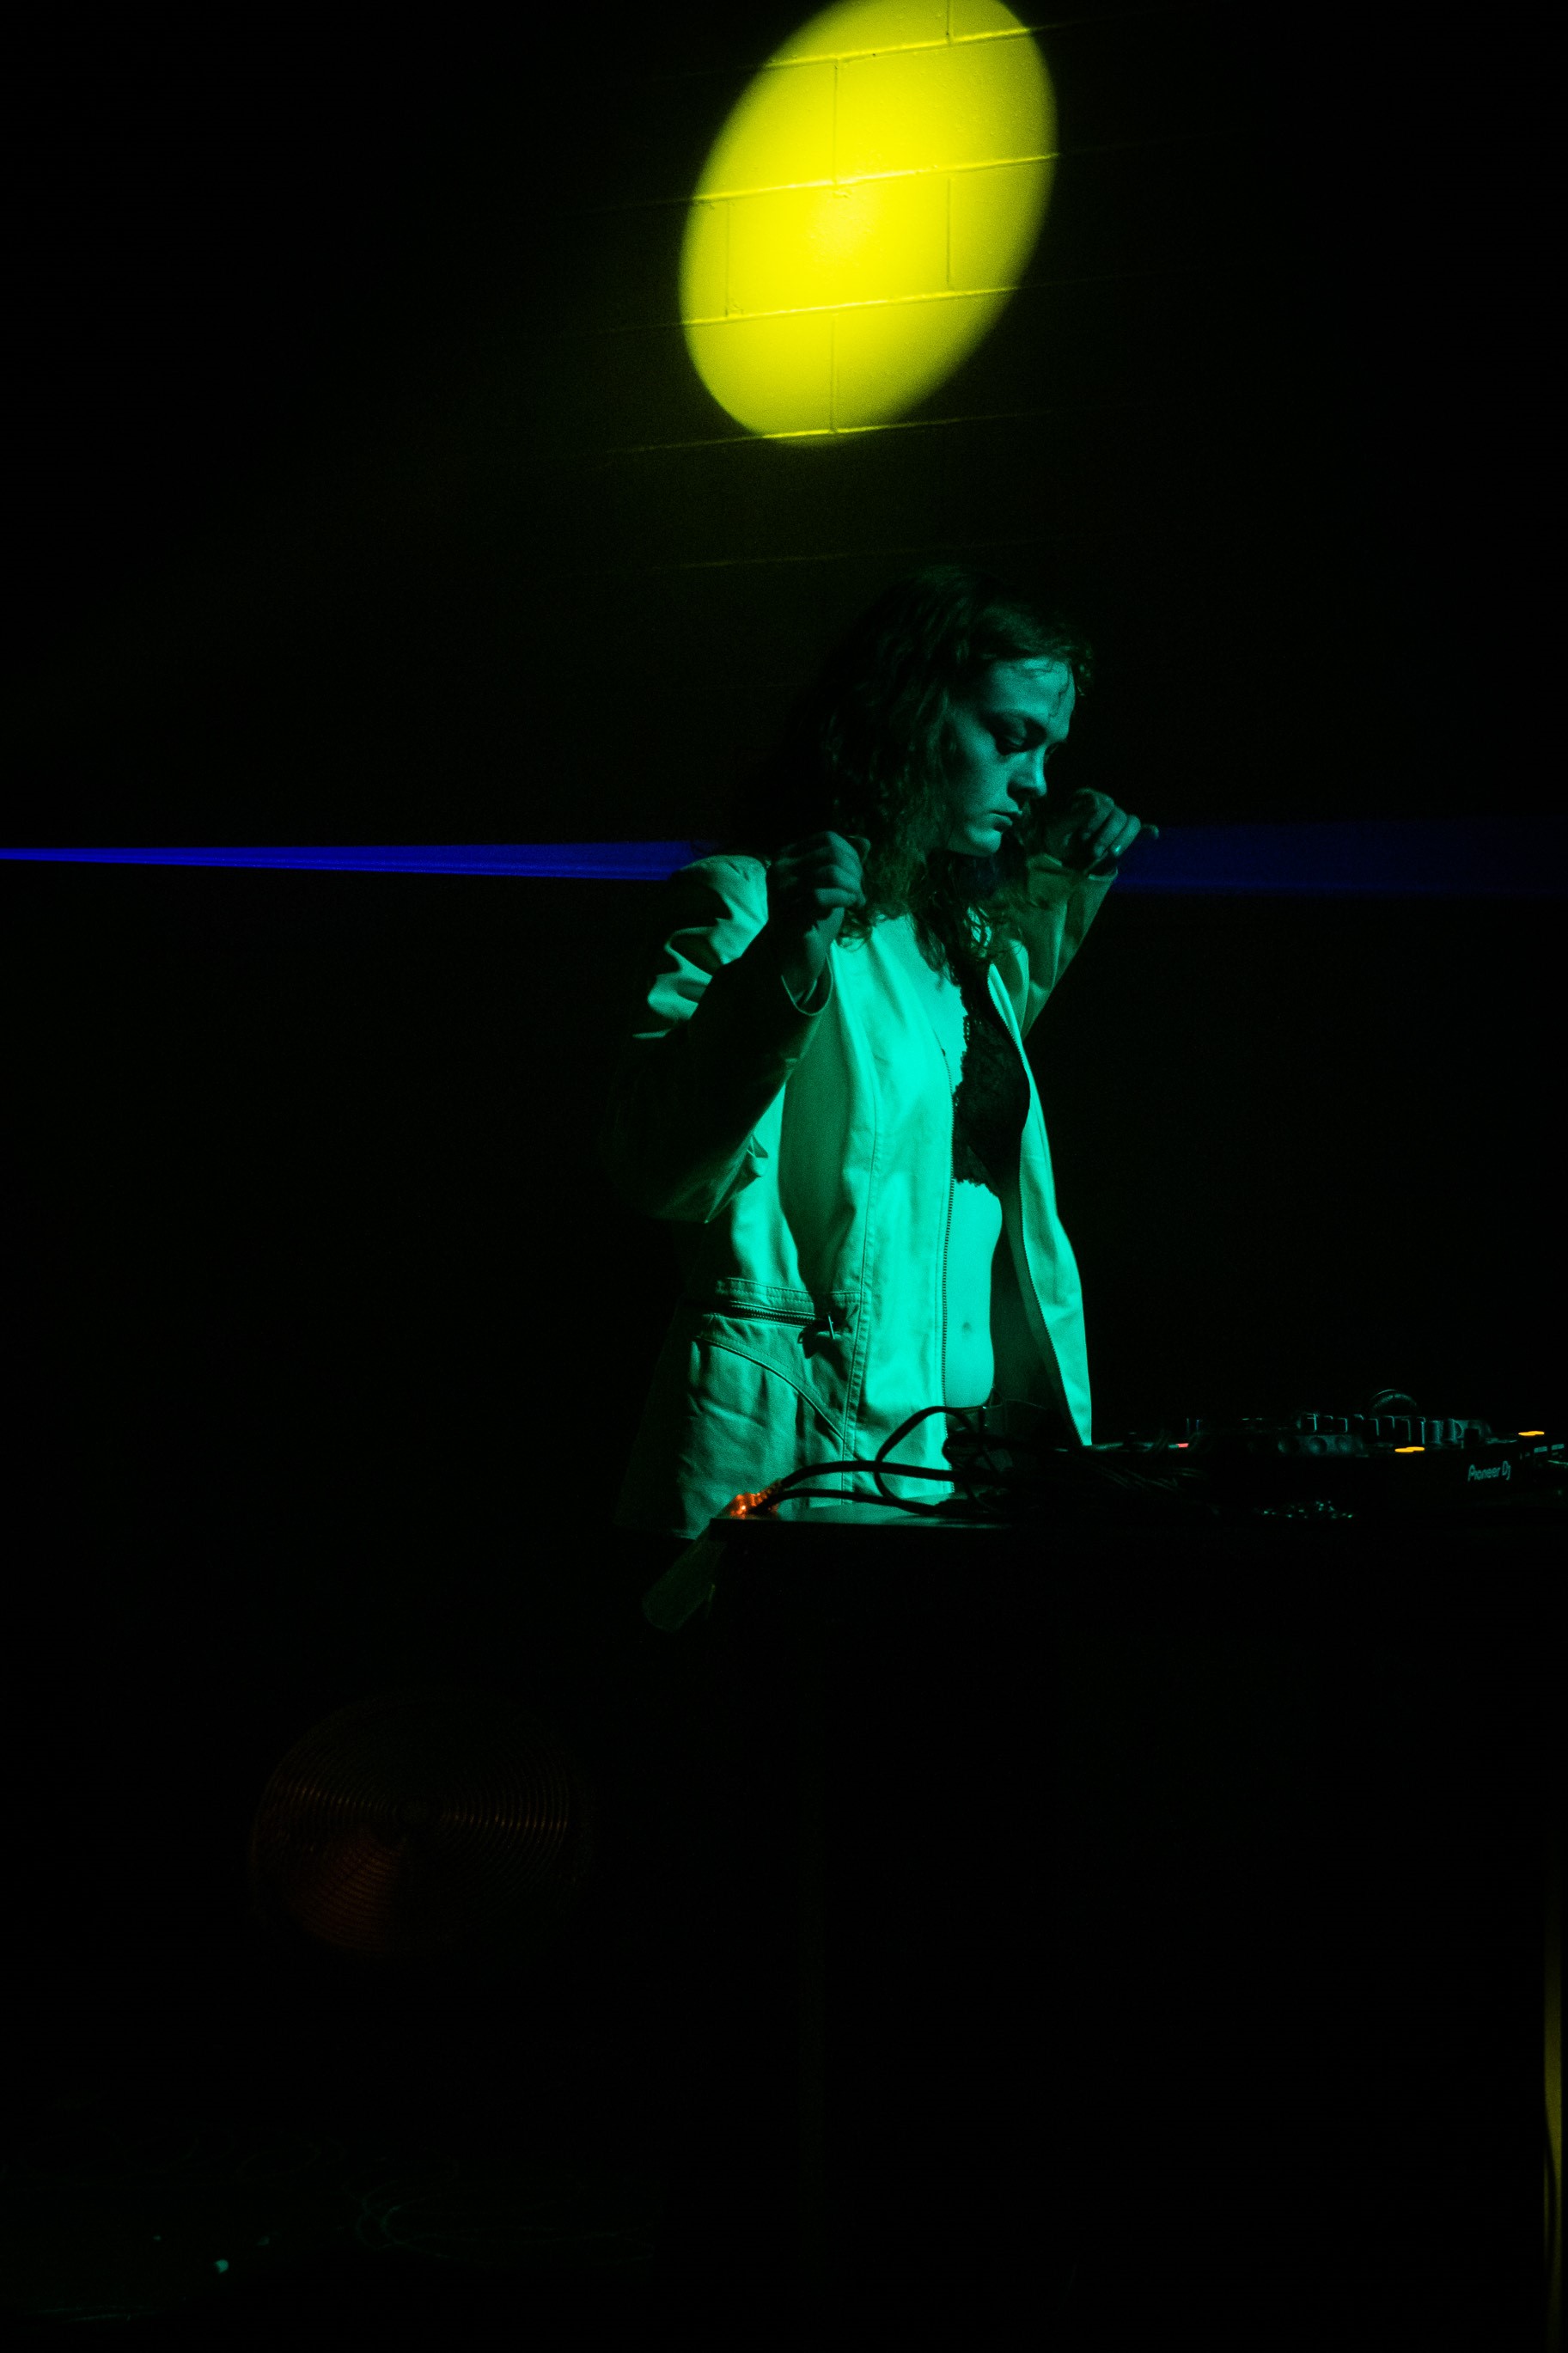 Photo of DJ Slayla, a green-lit woman isolated in a black space with a bright yellow circular light projected above her